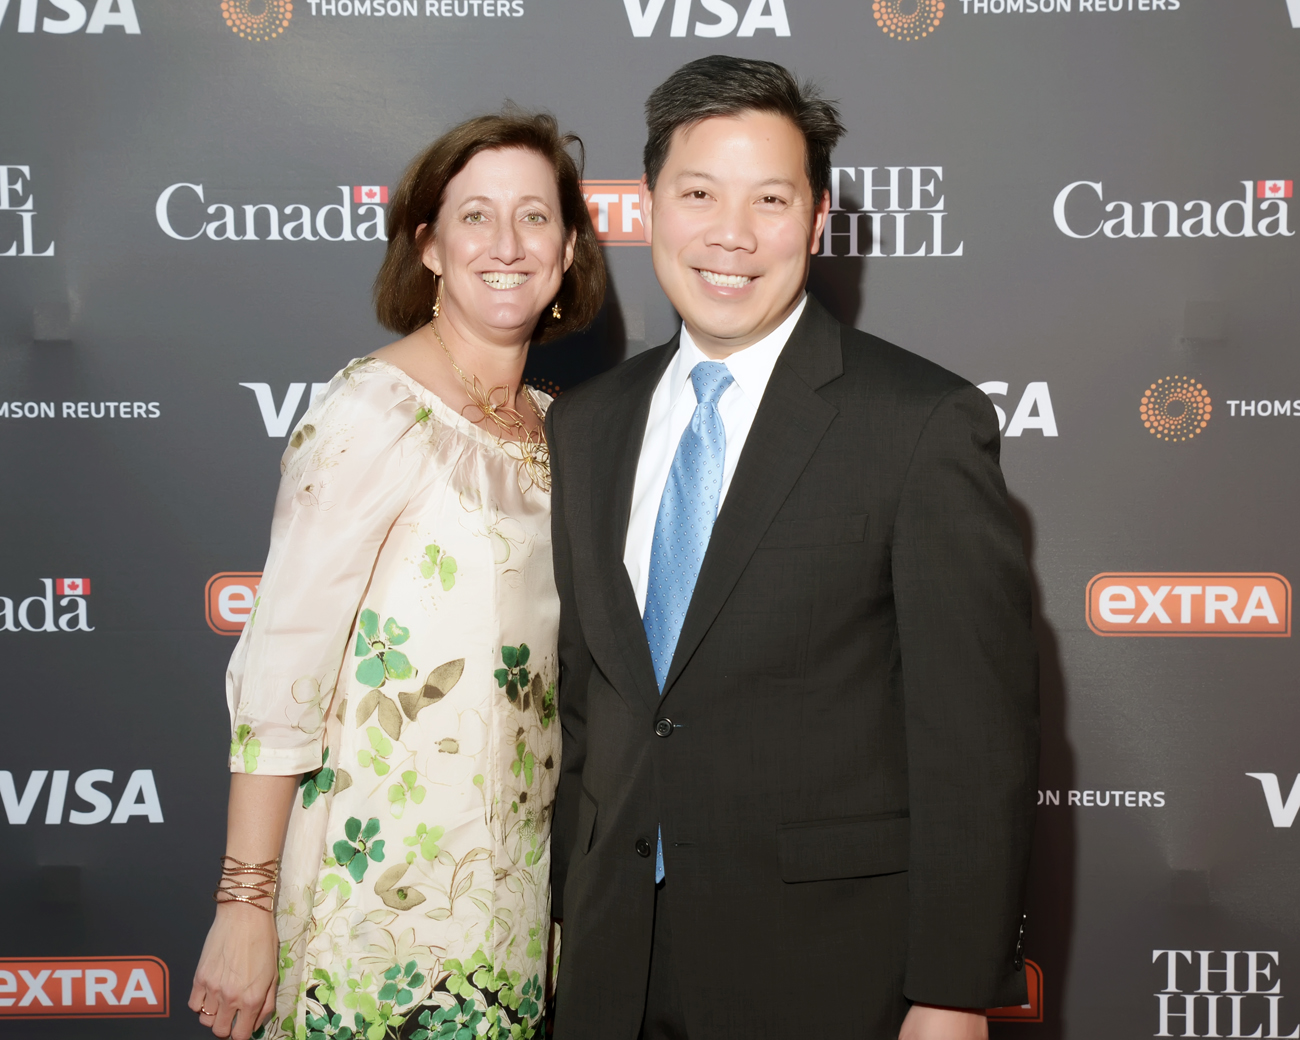 Katie Thomson, General Counsel for US Department of Transportation, and her husband Christopher Lu, Deputy Secretary of Labor, attend The Hill/Extra/Embassy of Canada WHCD pre-party in Washington D.C. on Friday April 29. (Shannon Finney Photography)